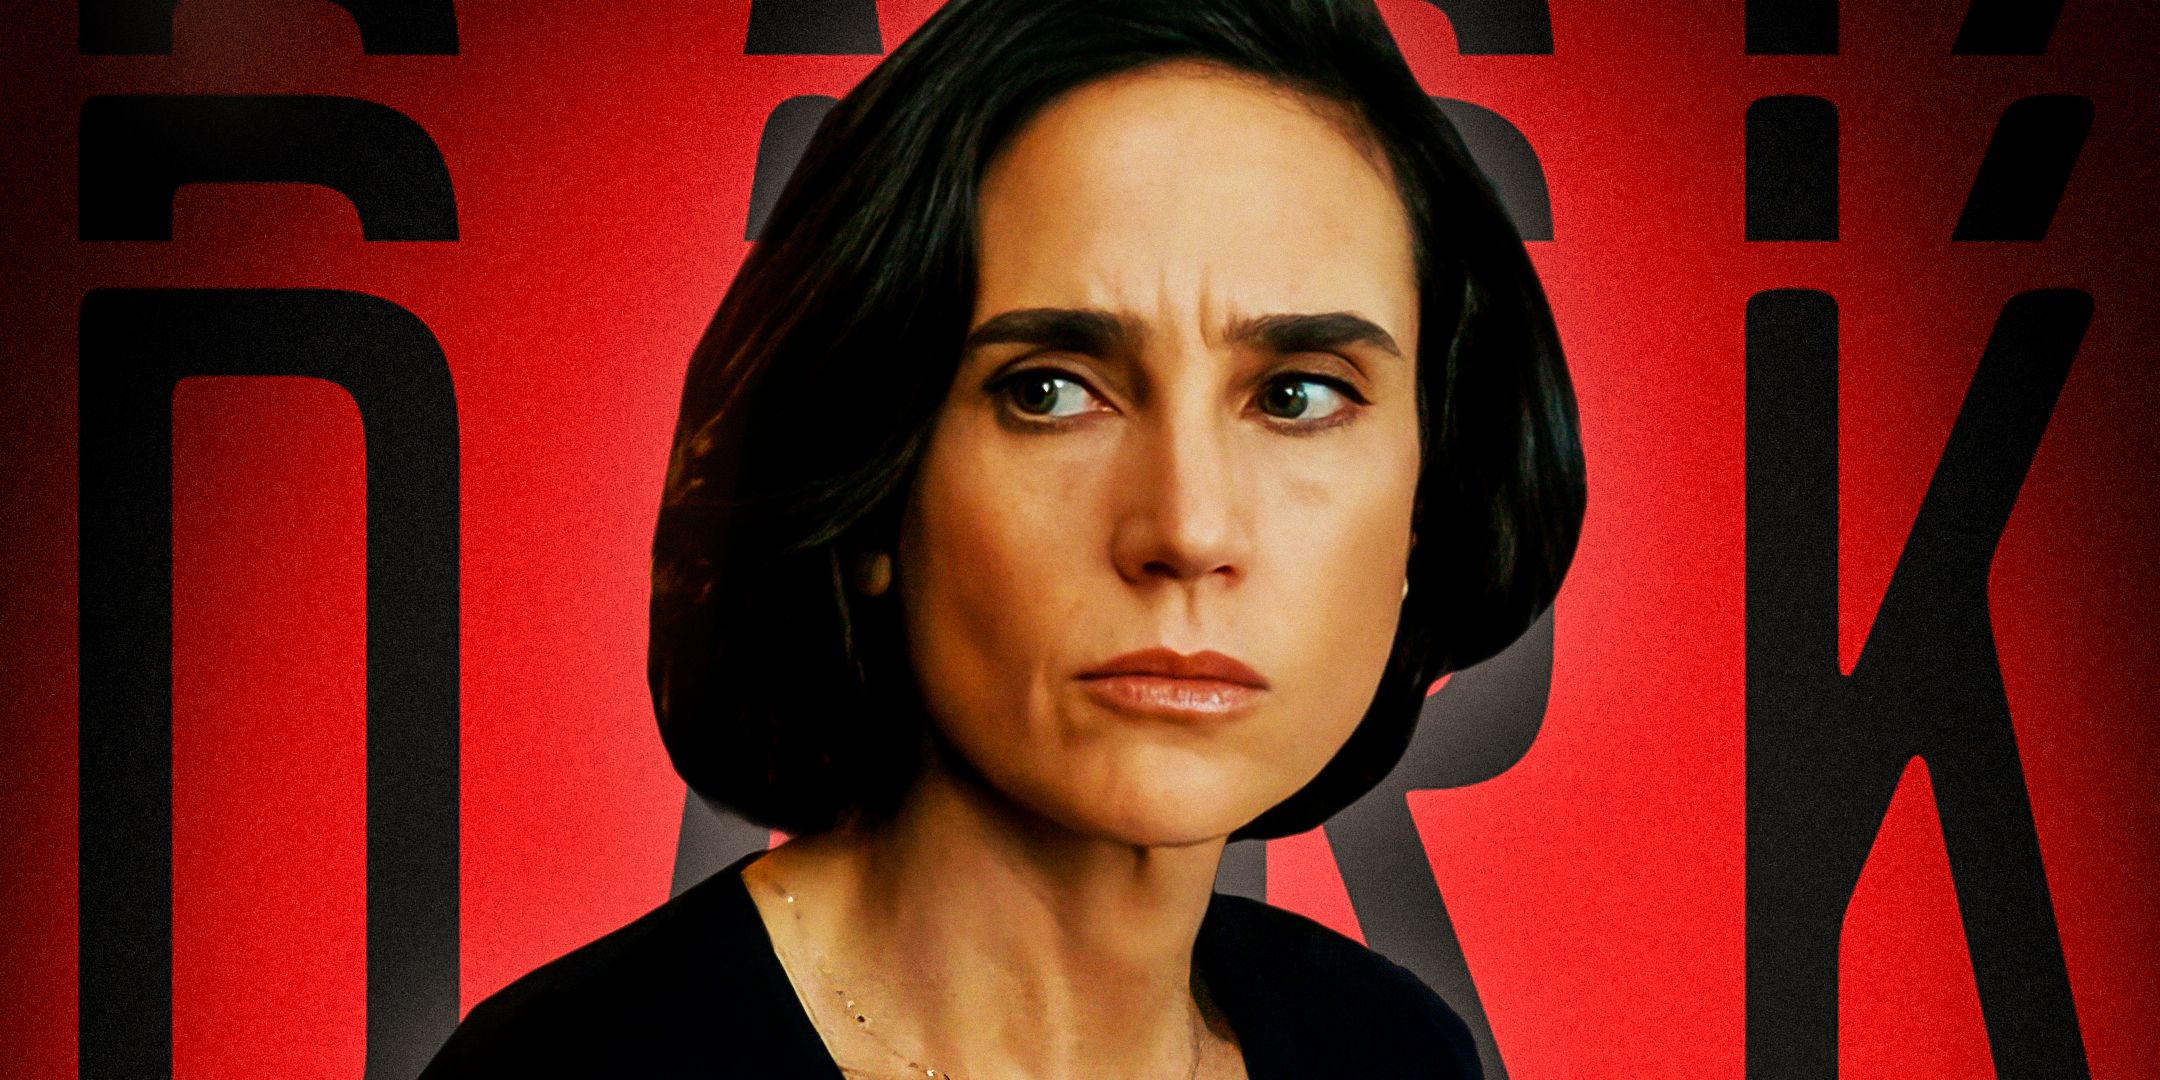 A custom image of Jennifer Connelly as Daniela from Dark Matter against a background of the Dark Matter book cover